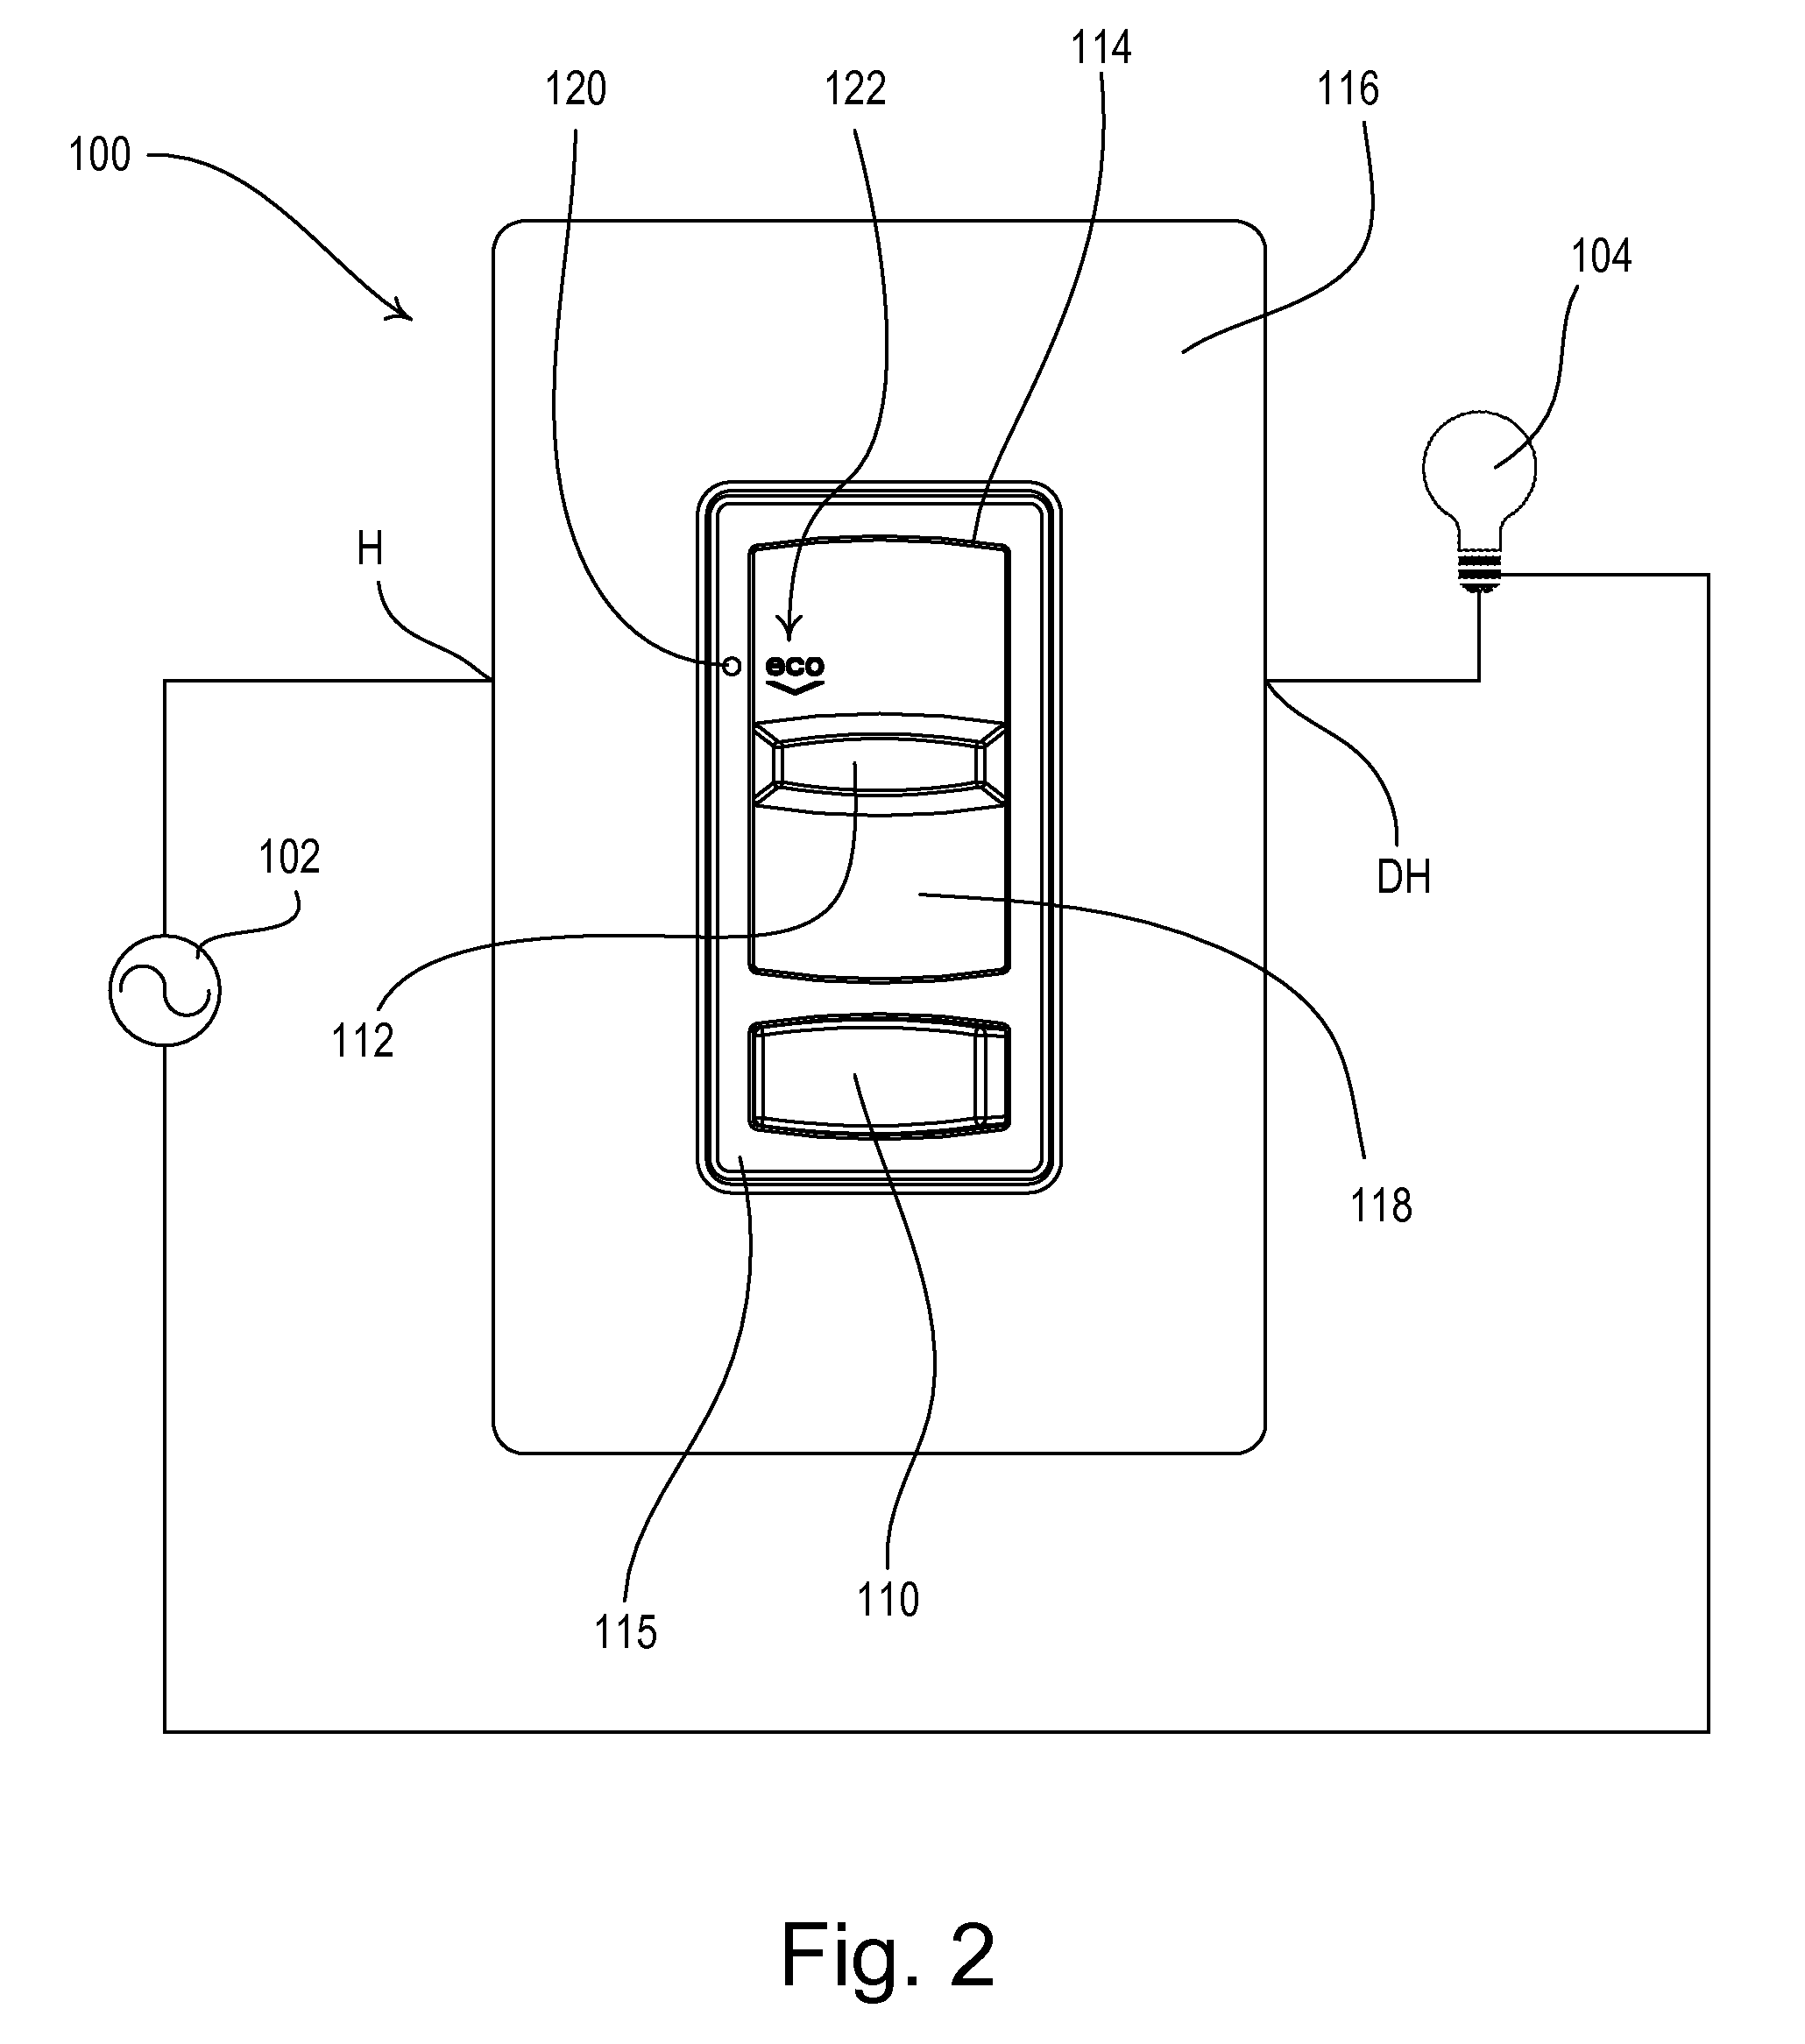 Load Control Device Having A Visual Indication of Energy Savings and Usage Information